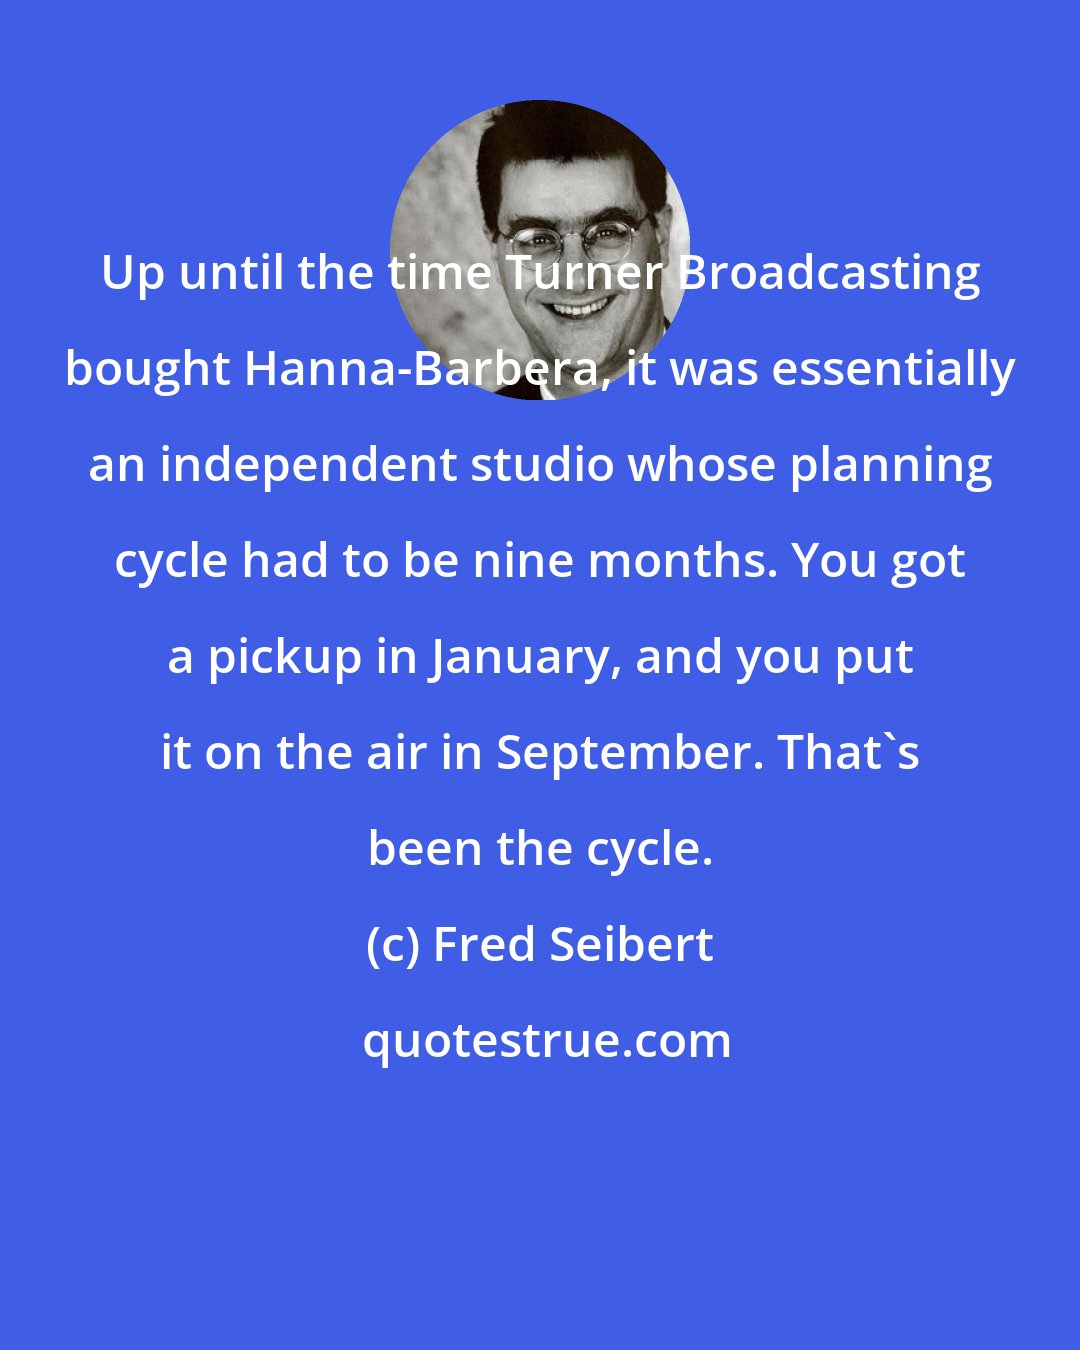 Fred Seibert: Up until the time Turner Broadcasting bought Hanna-Barbera, it was essentially an independent studio whose planning cycle had to be nine months. You got a pickup in January, and you put it on the air in September. That's been the cycle.